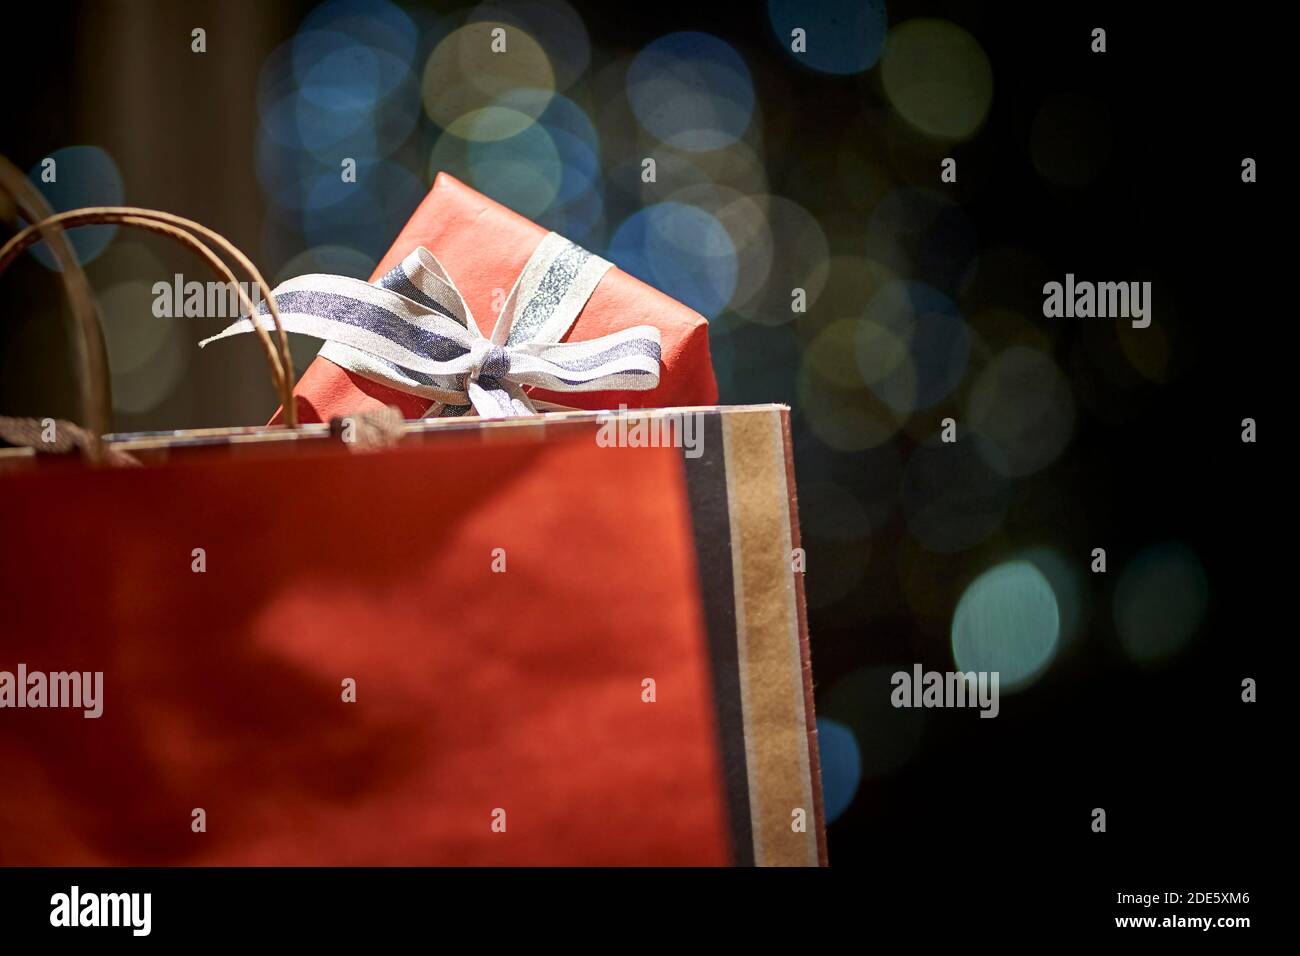 box of wrapped gift sticking out of paper shopping bag Stock Photo